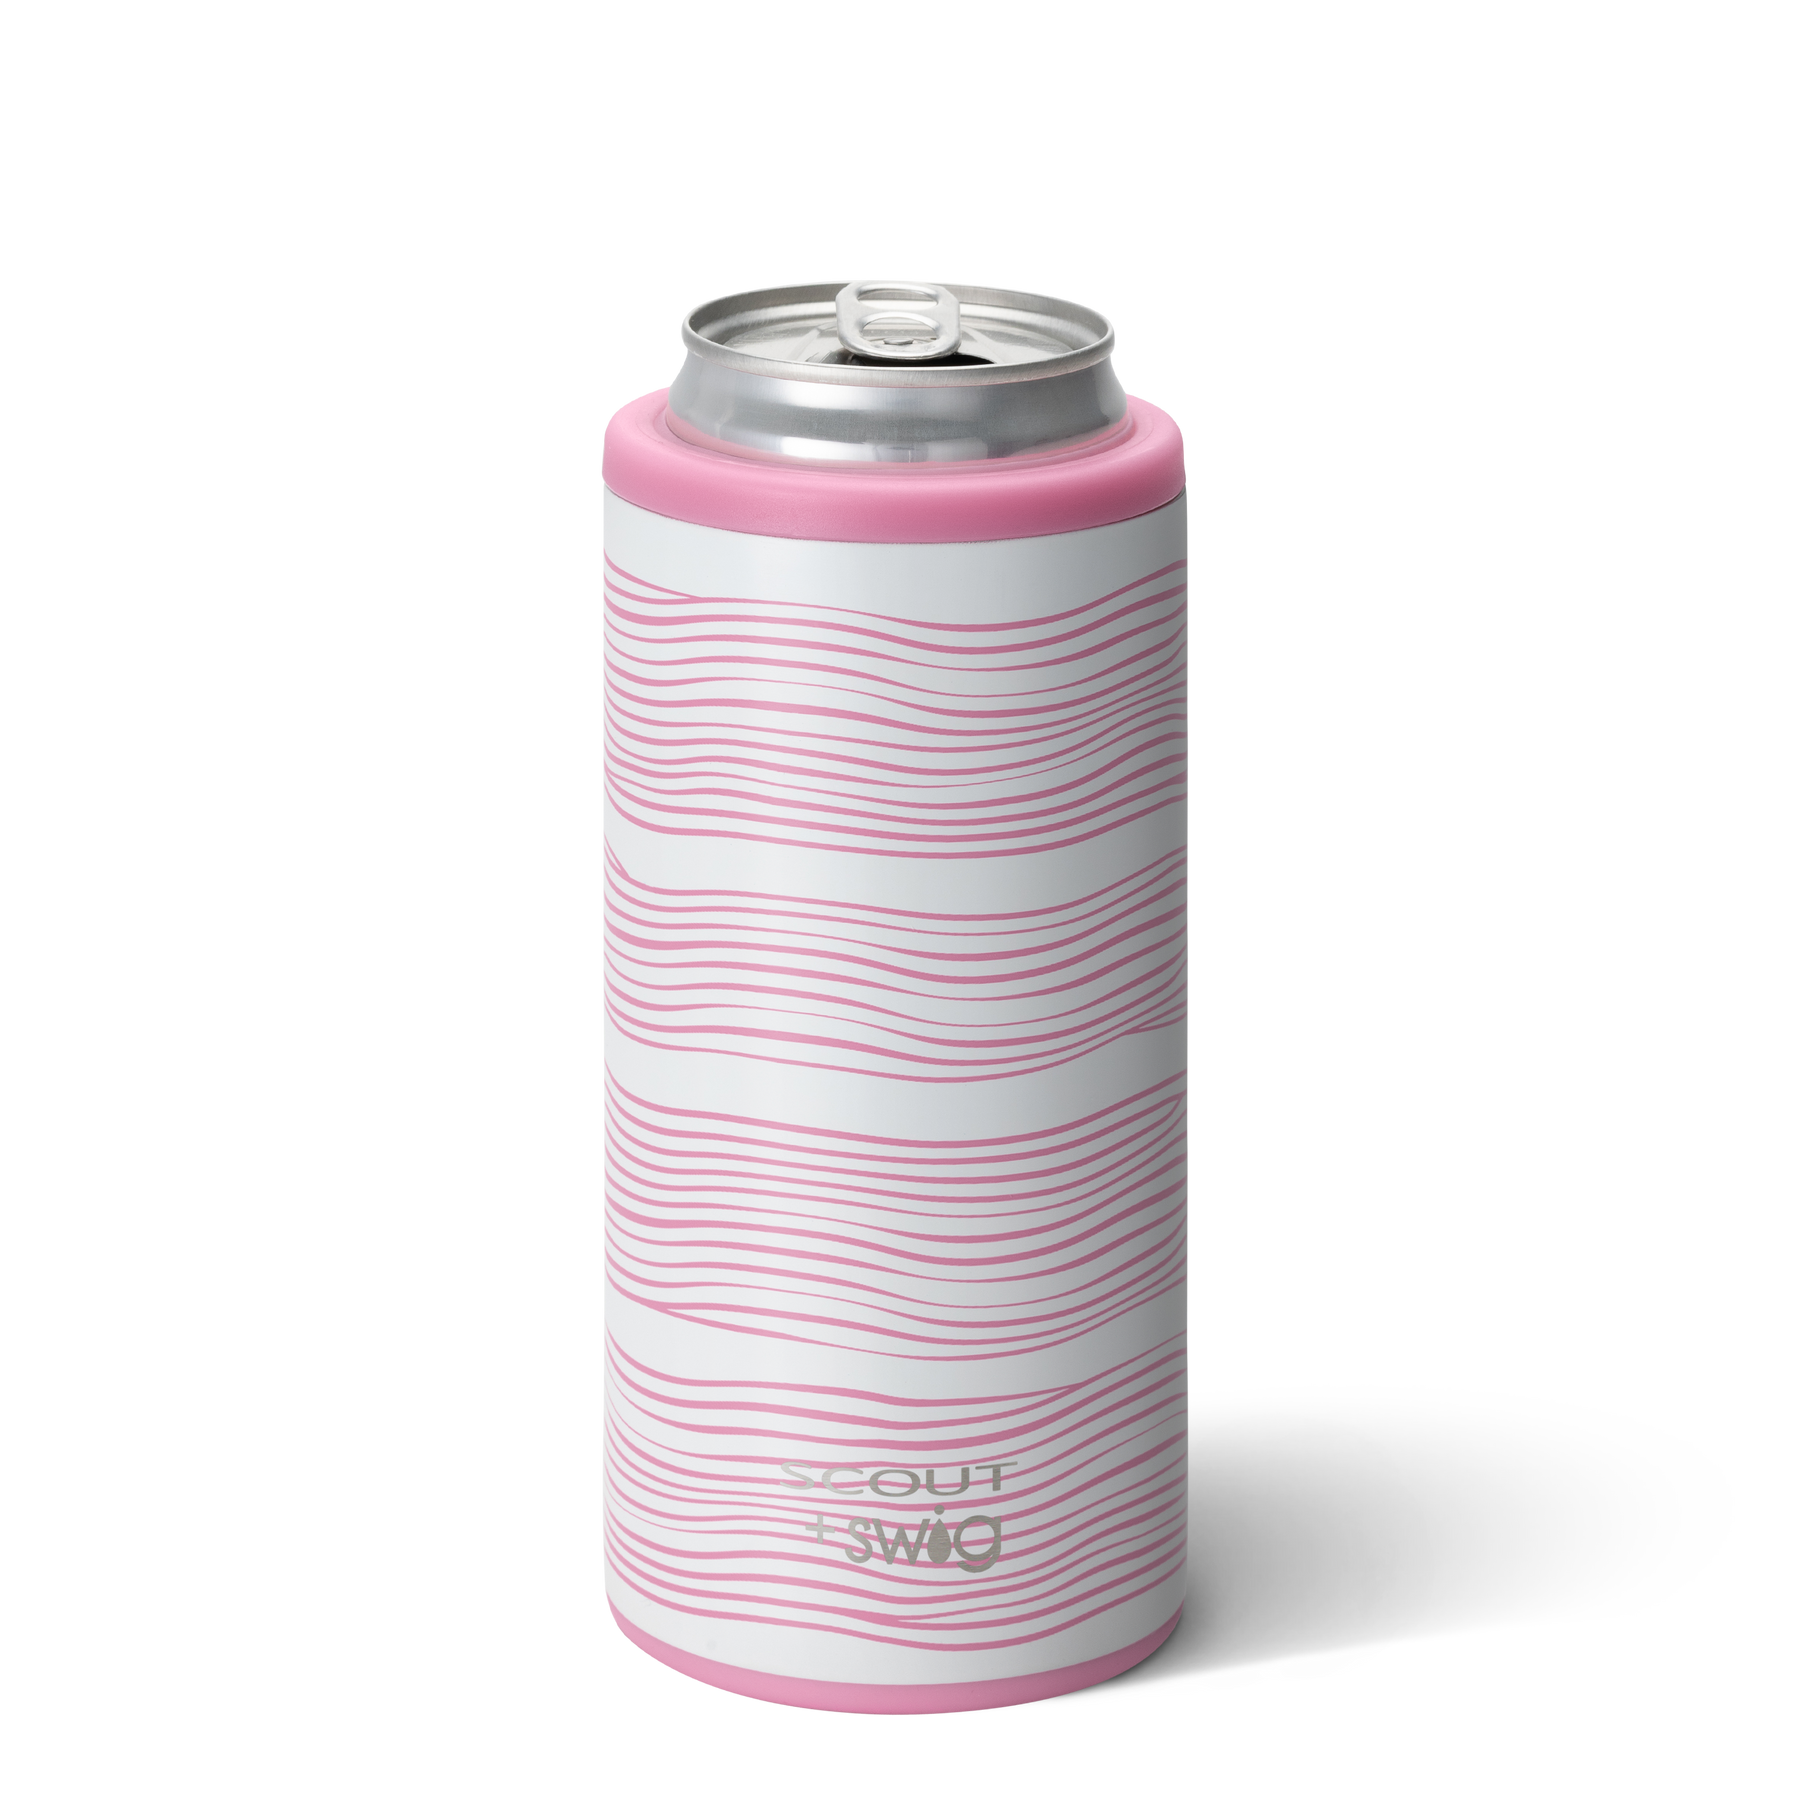  Swig Sip Skinny Can Cooler - Double Wall Stainless Steel Vacuum  Insulated Can Holder for 12oz Slim Tall Beverage Bridesmaid Gift (Laser  Leopard): Home & Kitchen